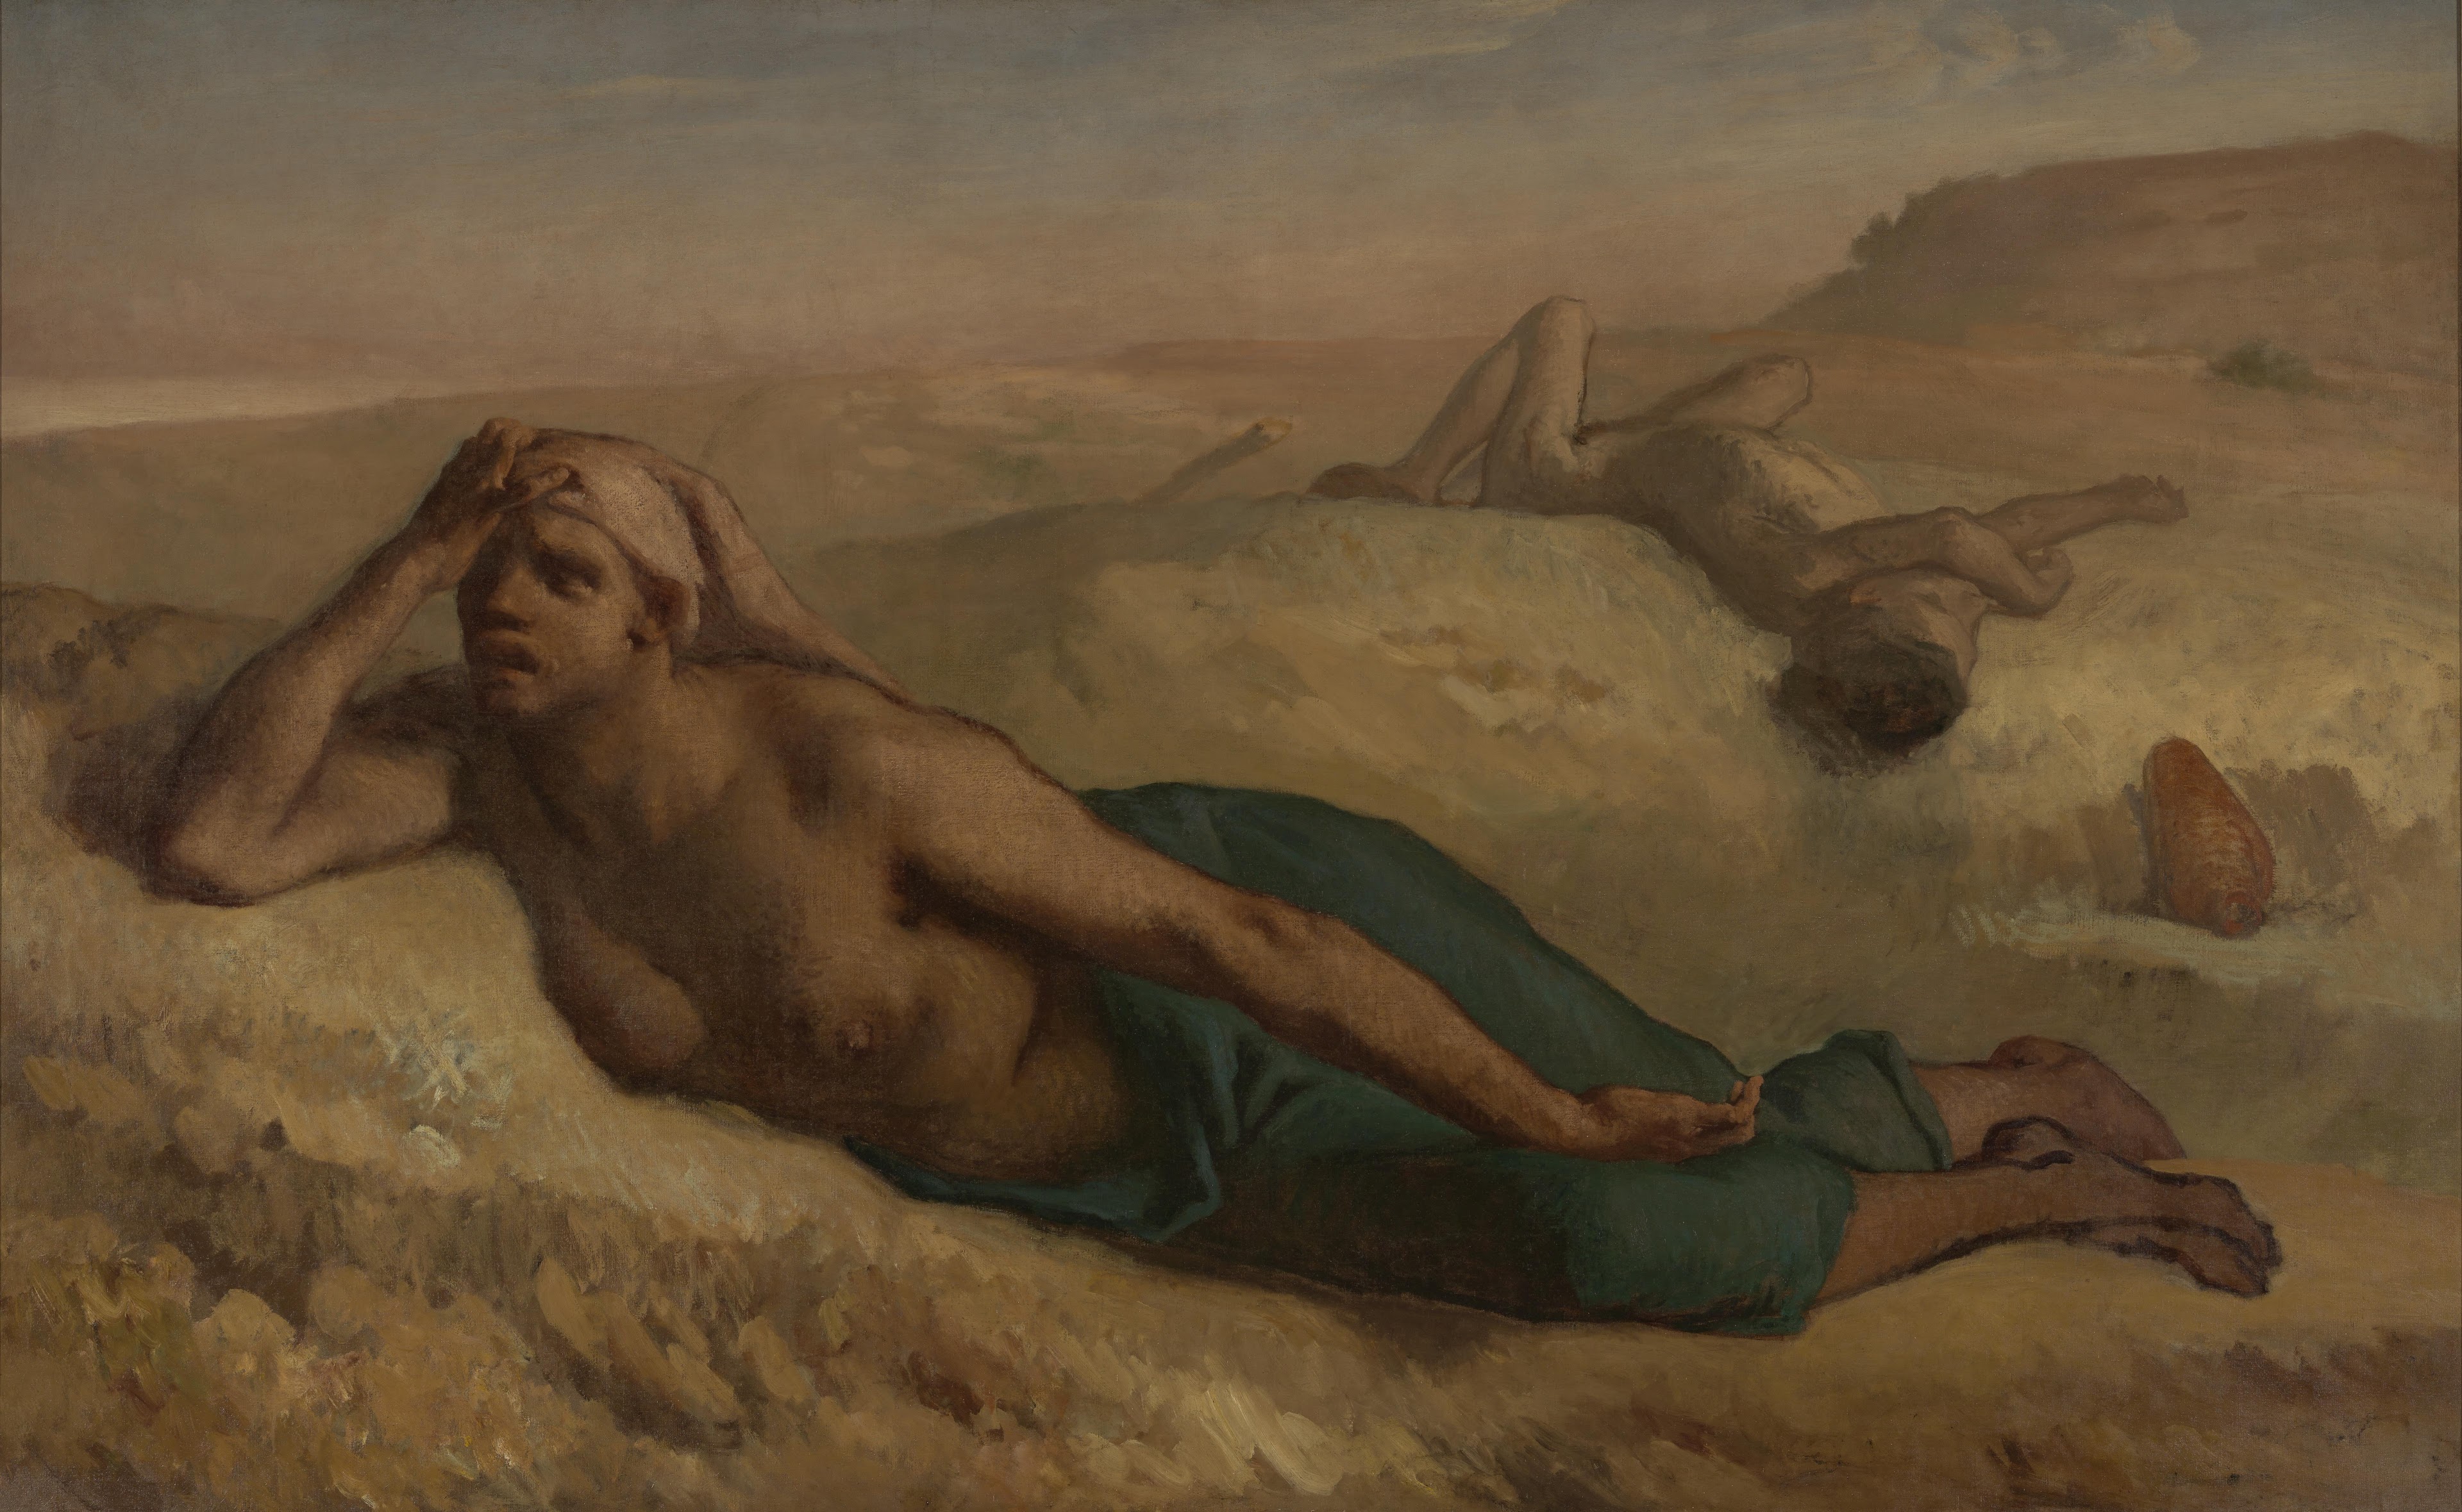 0140_Jean-Francois Millet_The desperate Hagar and Ishmael in the desert 썸네일